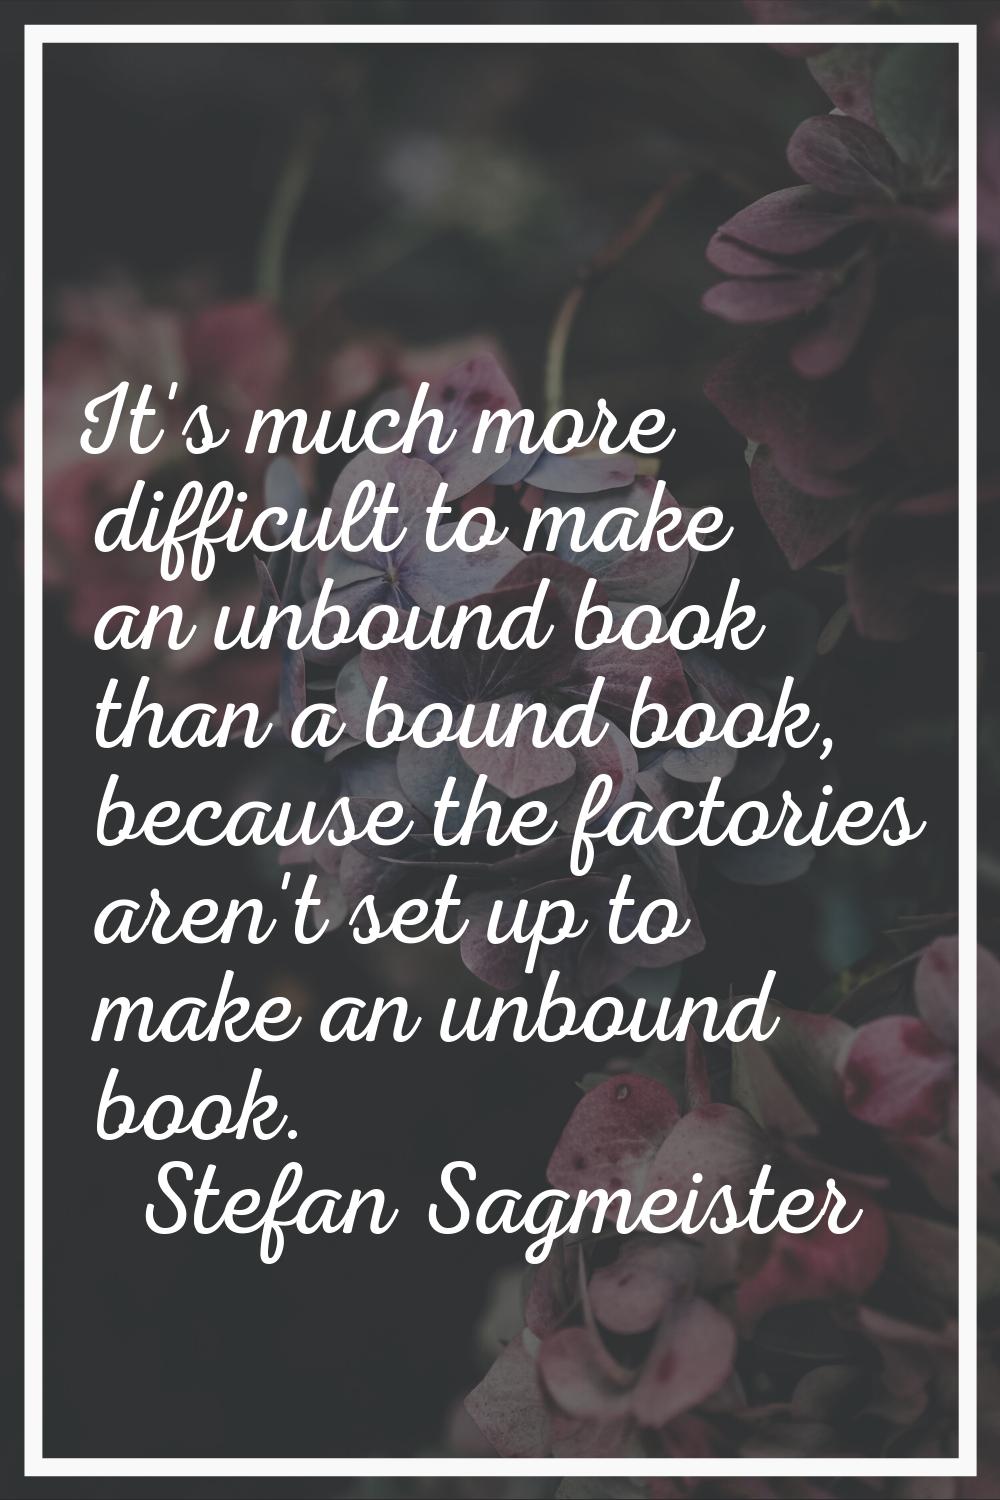 It's much more difficult to make an unbound book than a bound book, because the factories aren't se